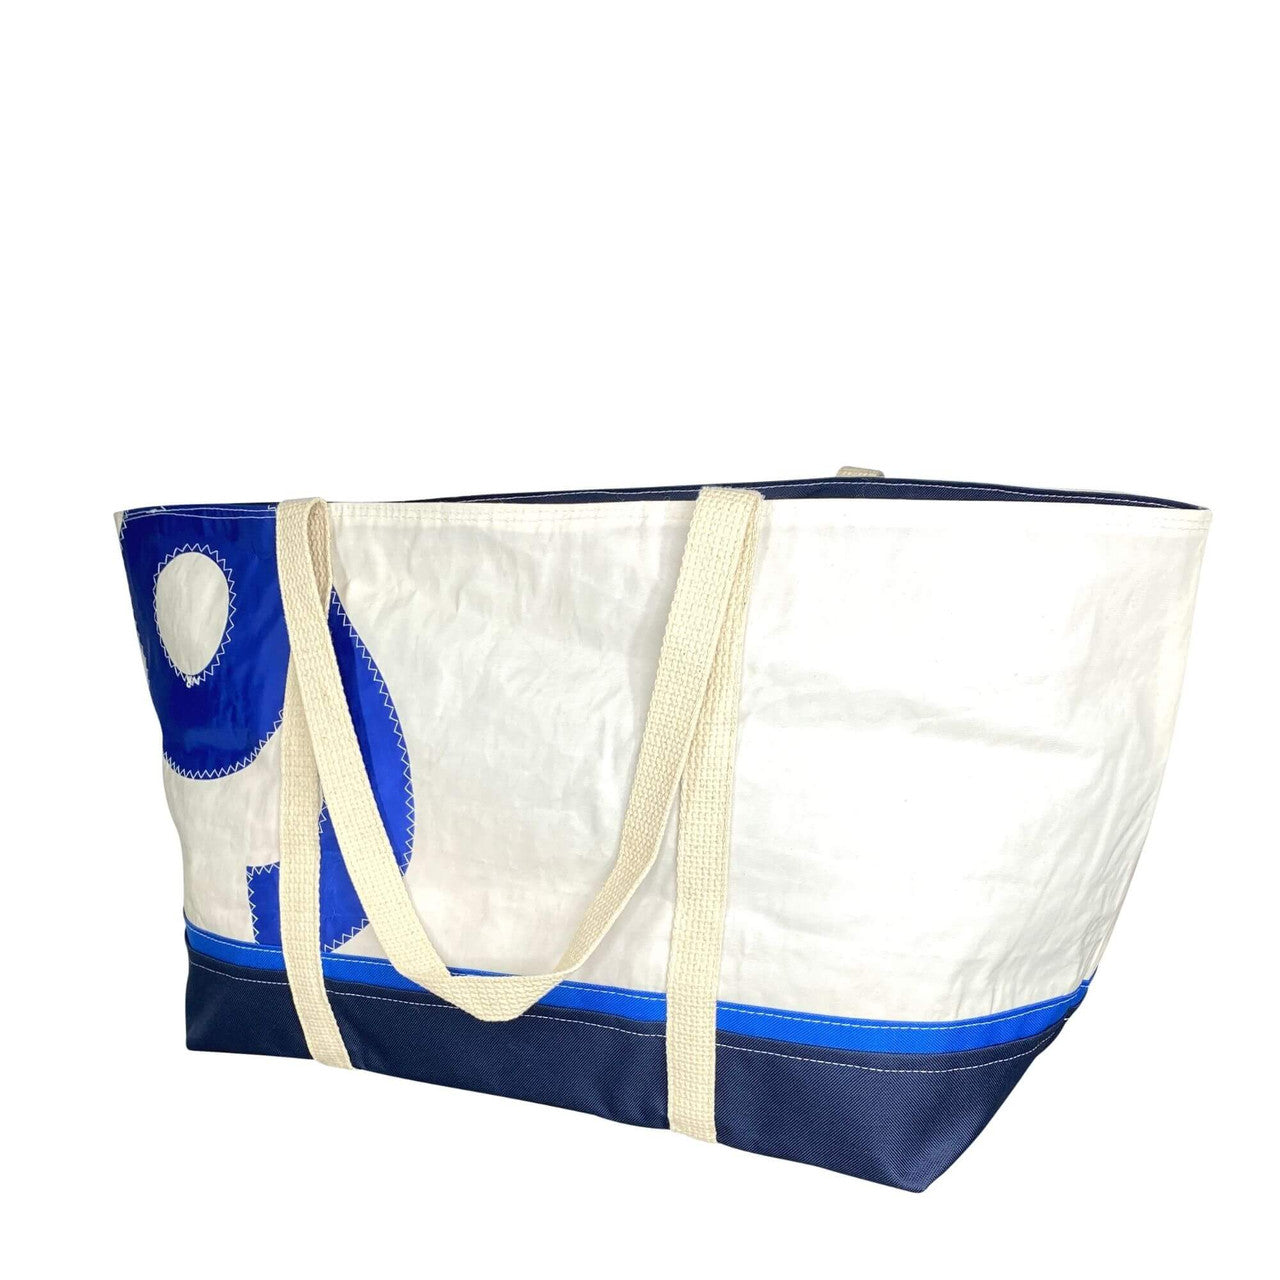 Recycled Sail Bag, Tote Bag Handmade from Sails, Blue & Navy Blue Handbags New England Trading Co   